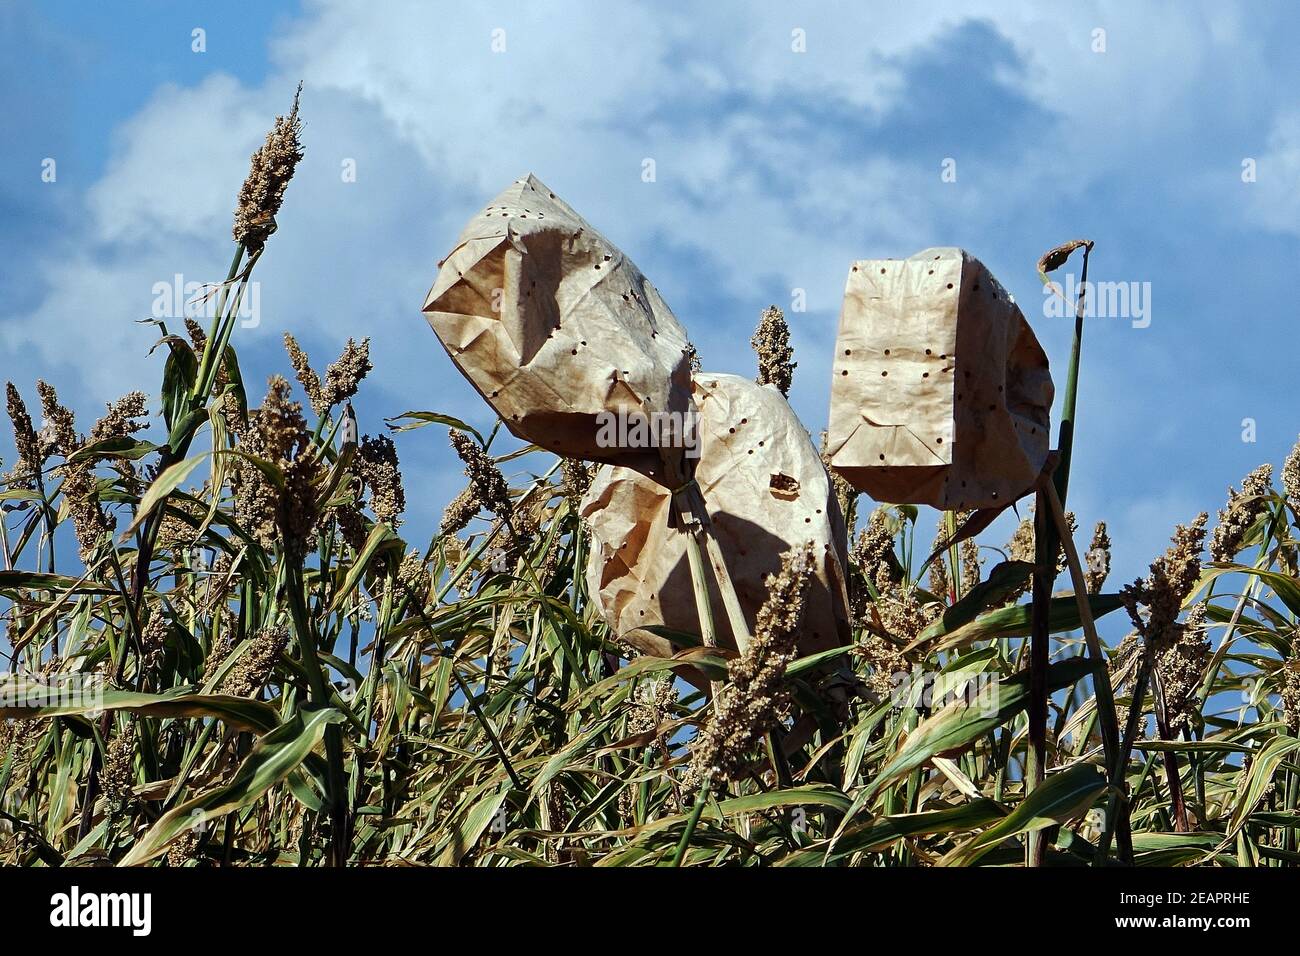 Cultivation of millet in the tropical climate of Bonaire, Caribbean Sea Stock Photo